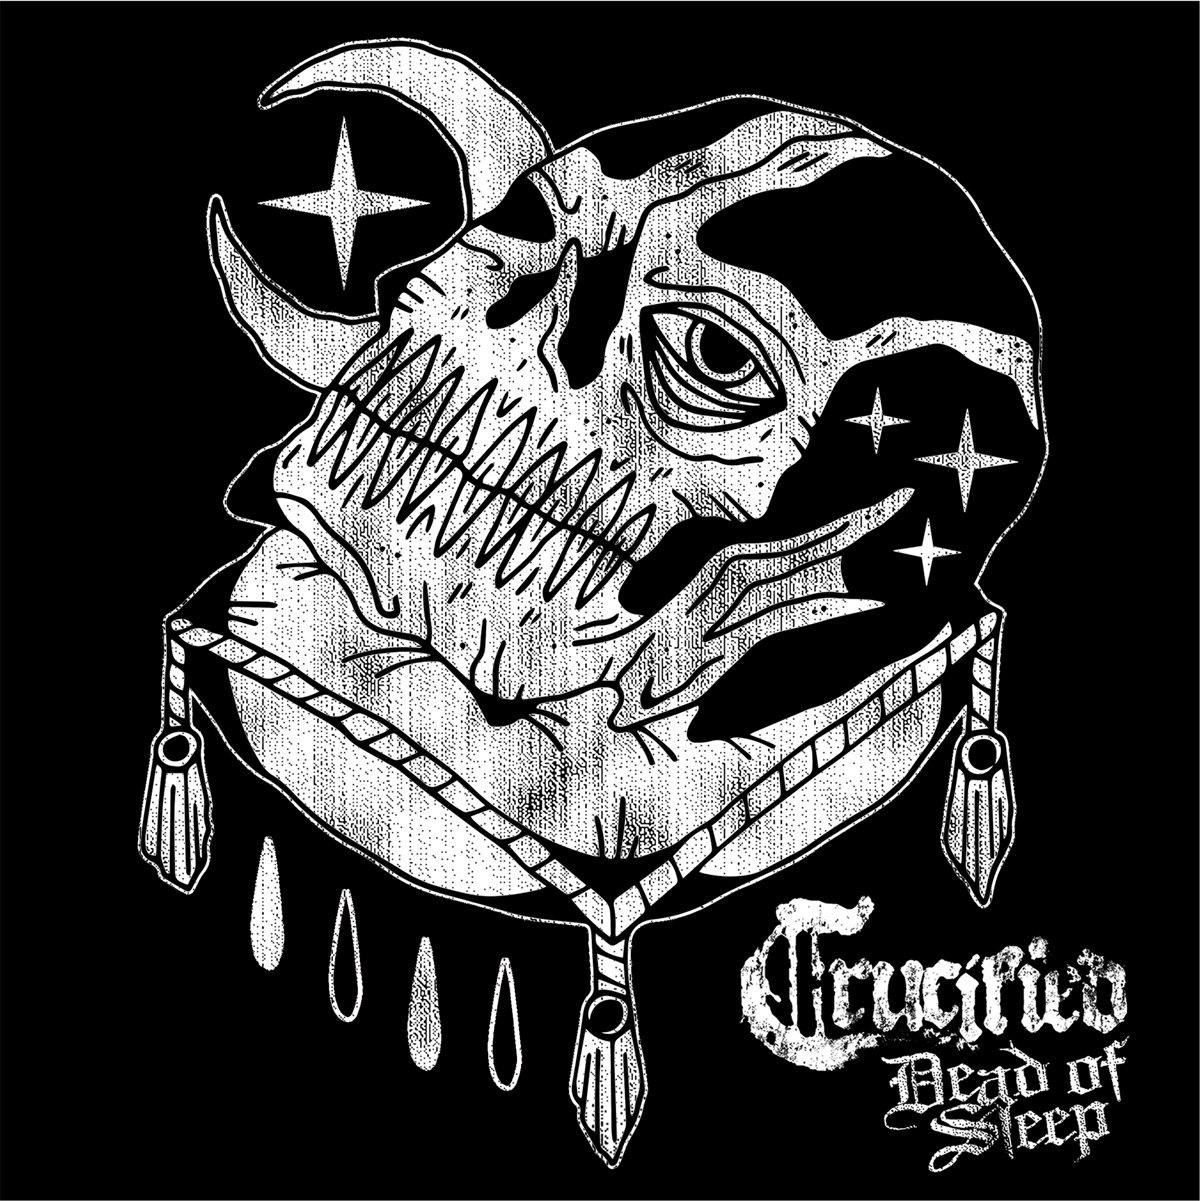 Buy – Crucified "Dead of Sleep" Digital Download – Band & Music Merch – Cold Cuts Merch